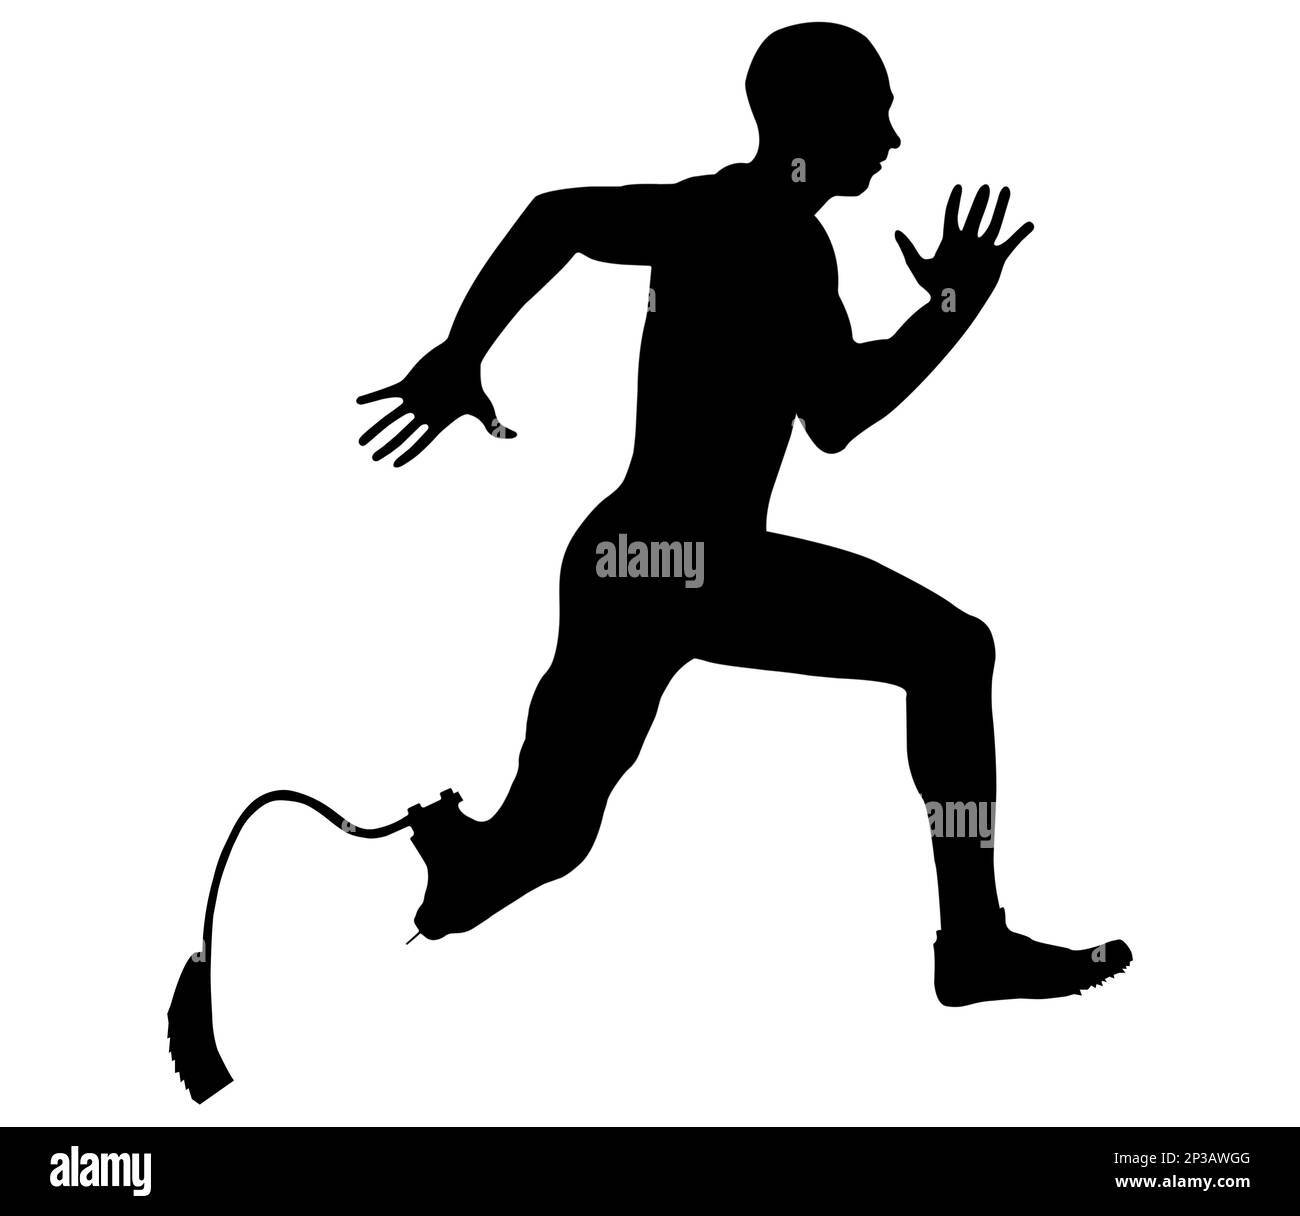 athlete disabled amputee running Stock Photo